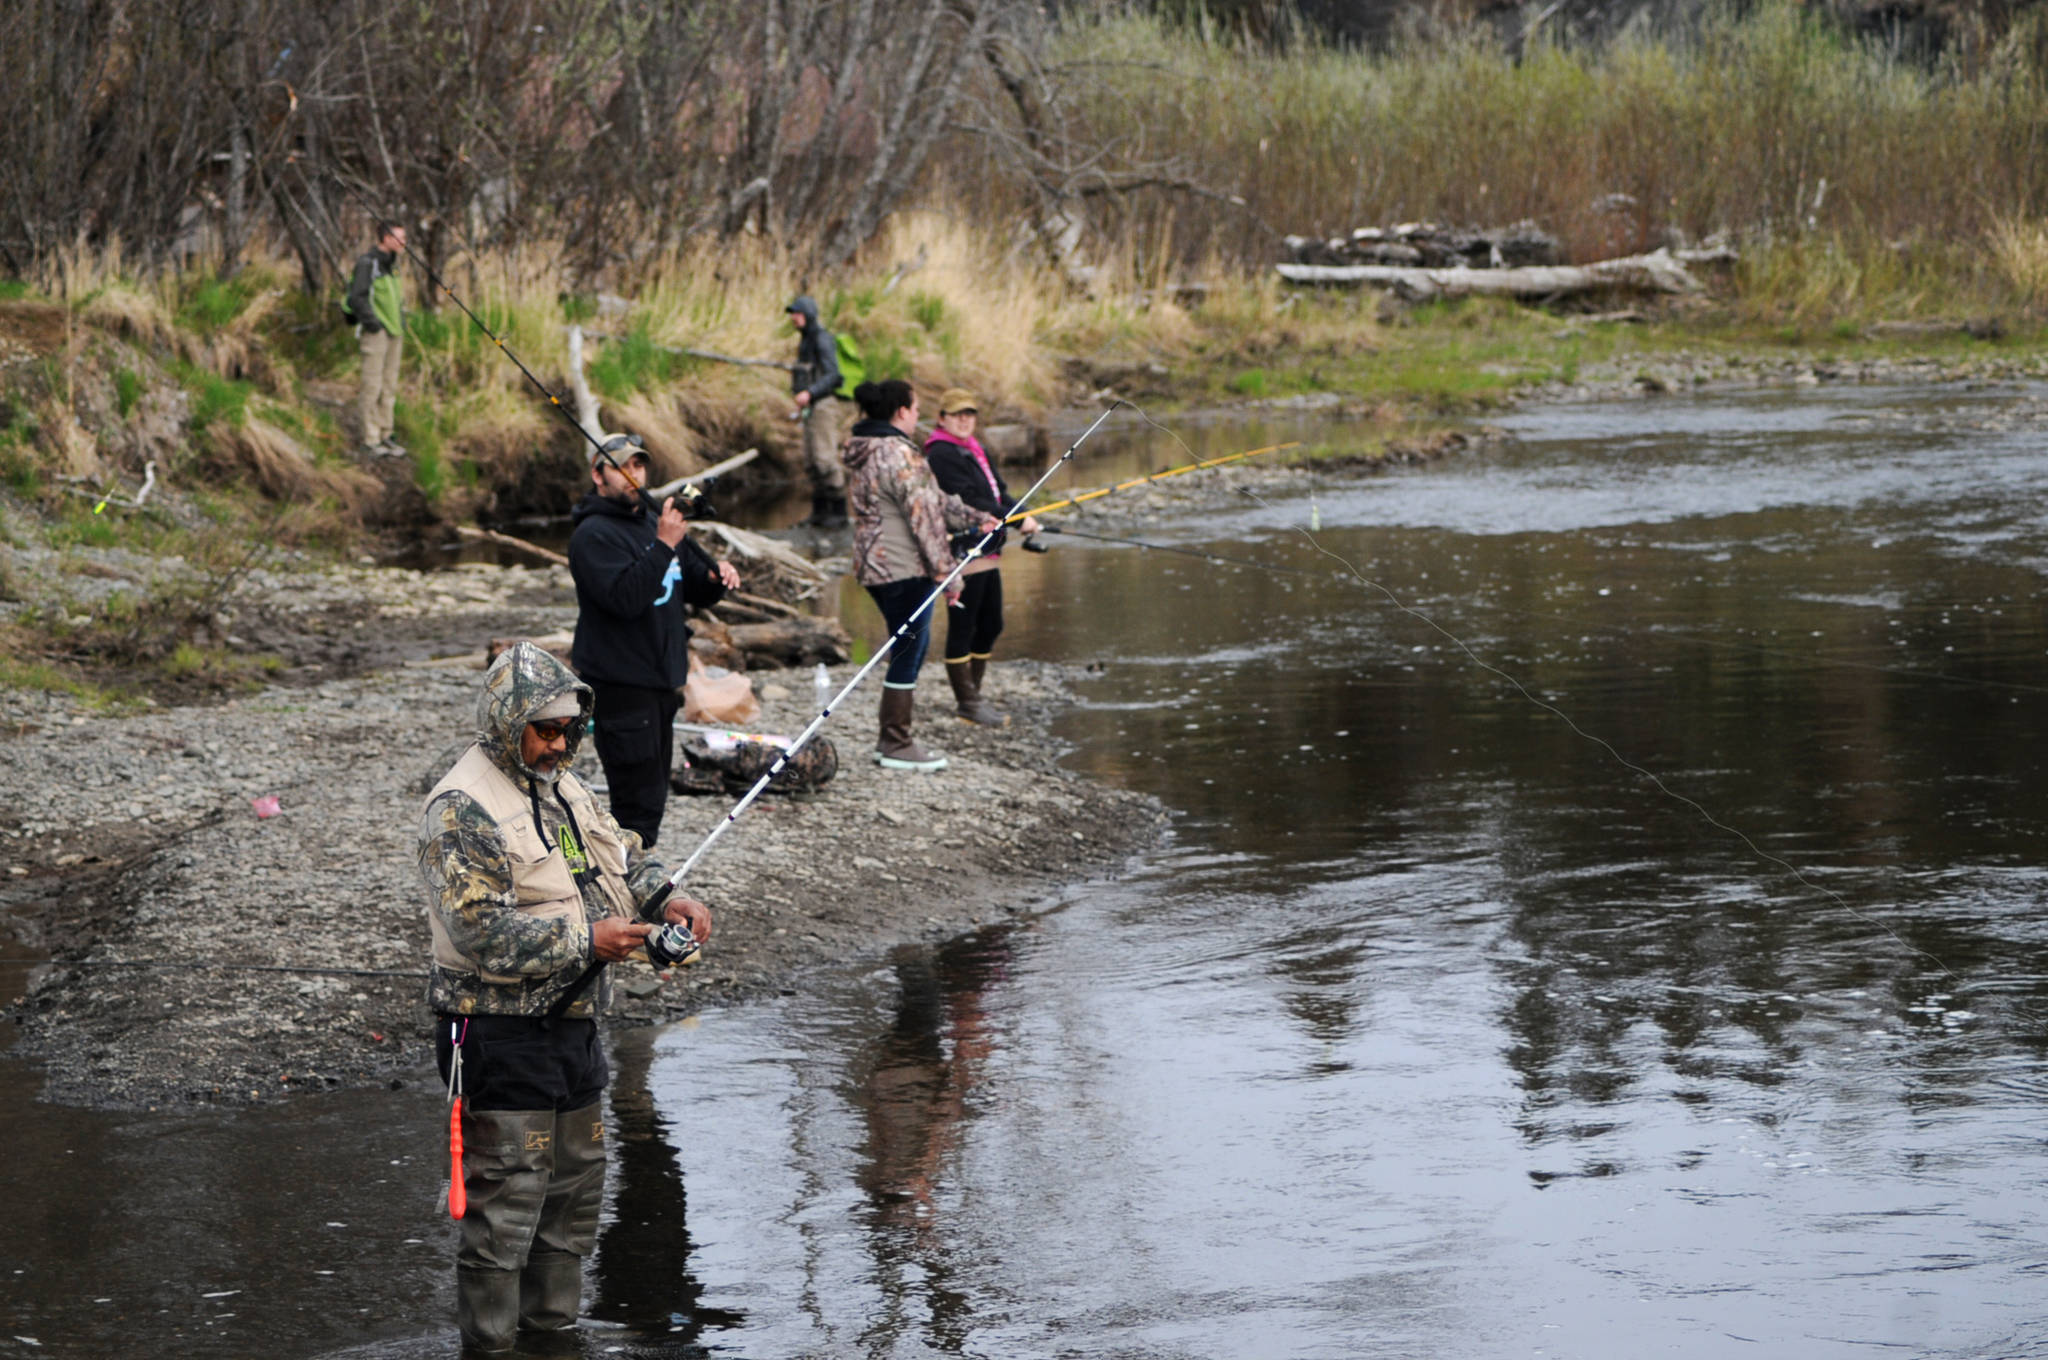 Anglers try their luck for king salmon on the Anchor River on Saturday, May 20, 2017 in Anchor Point, Alaska. (Elizabeth Earl/Peninsula Clarion)